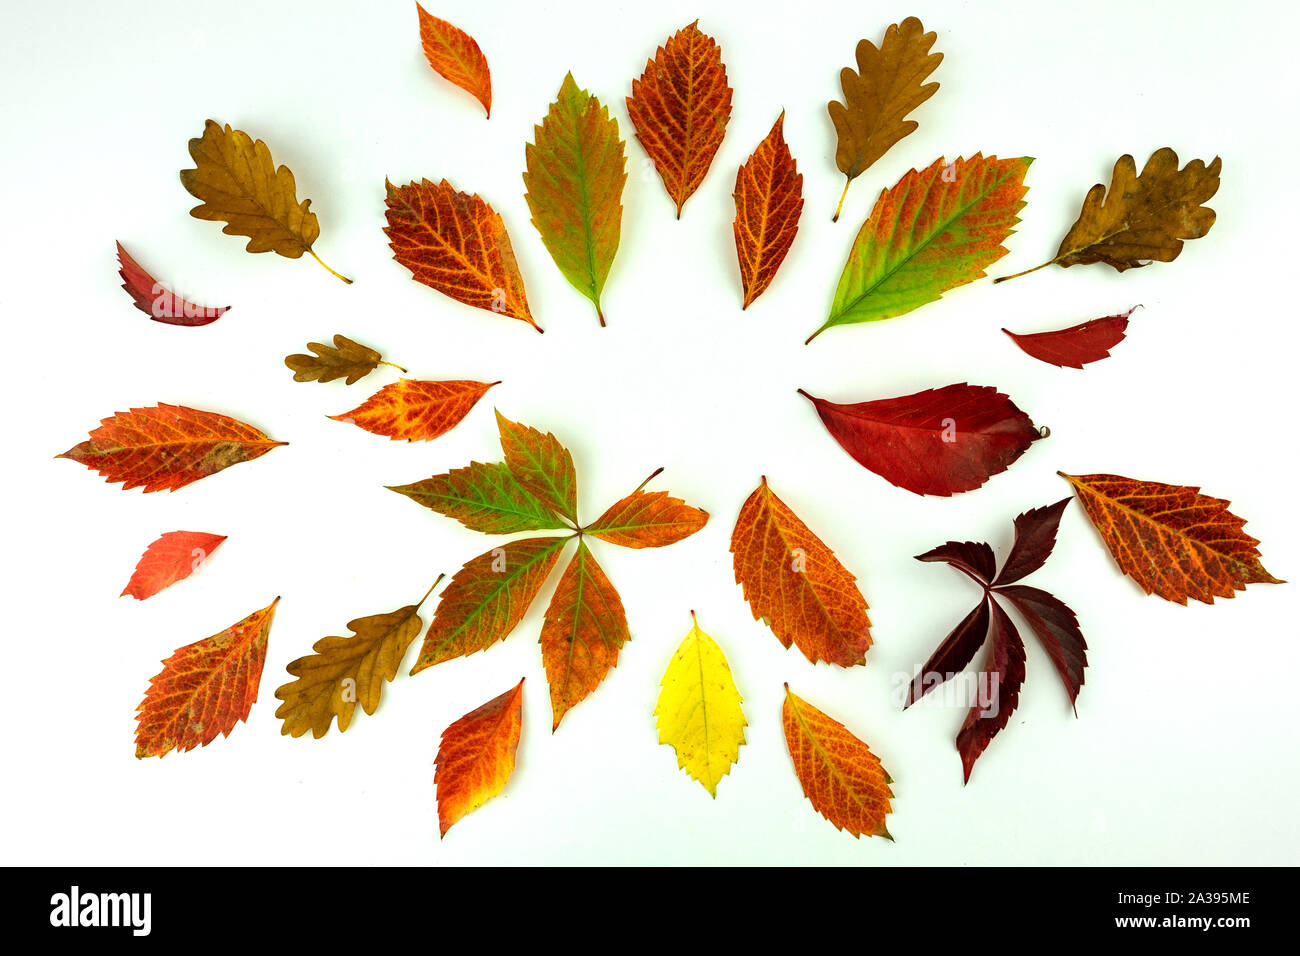 colorful autumn leaves pattern isolated on white background. flat lay, overhead view Stock Photo